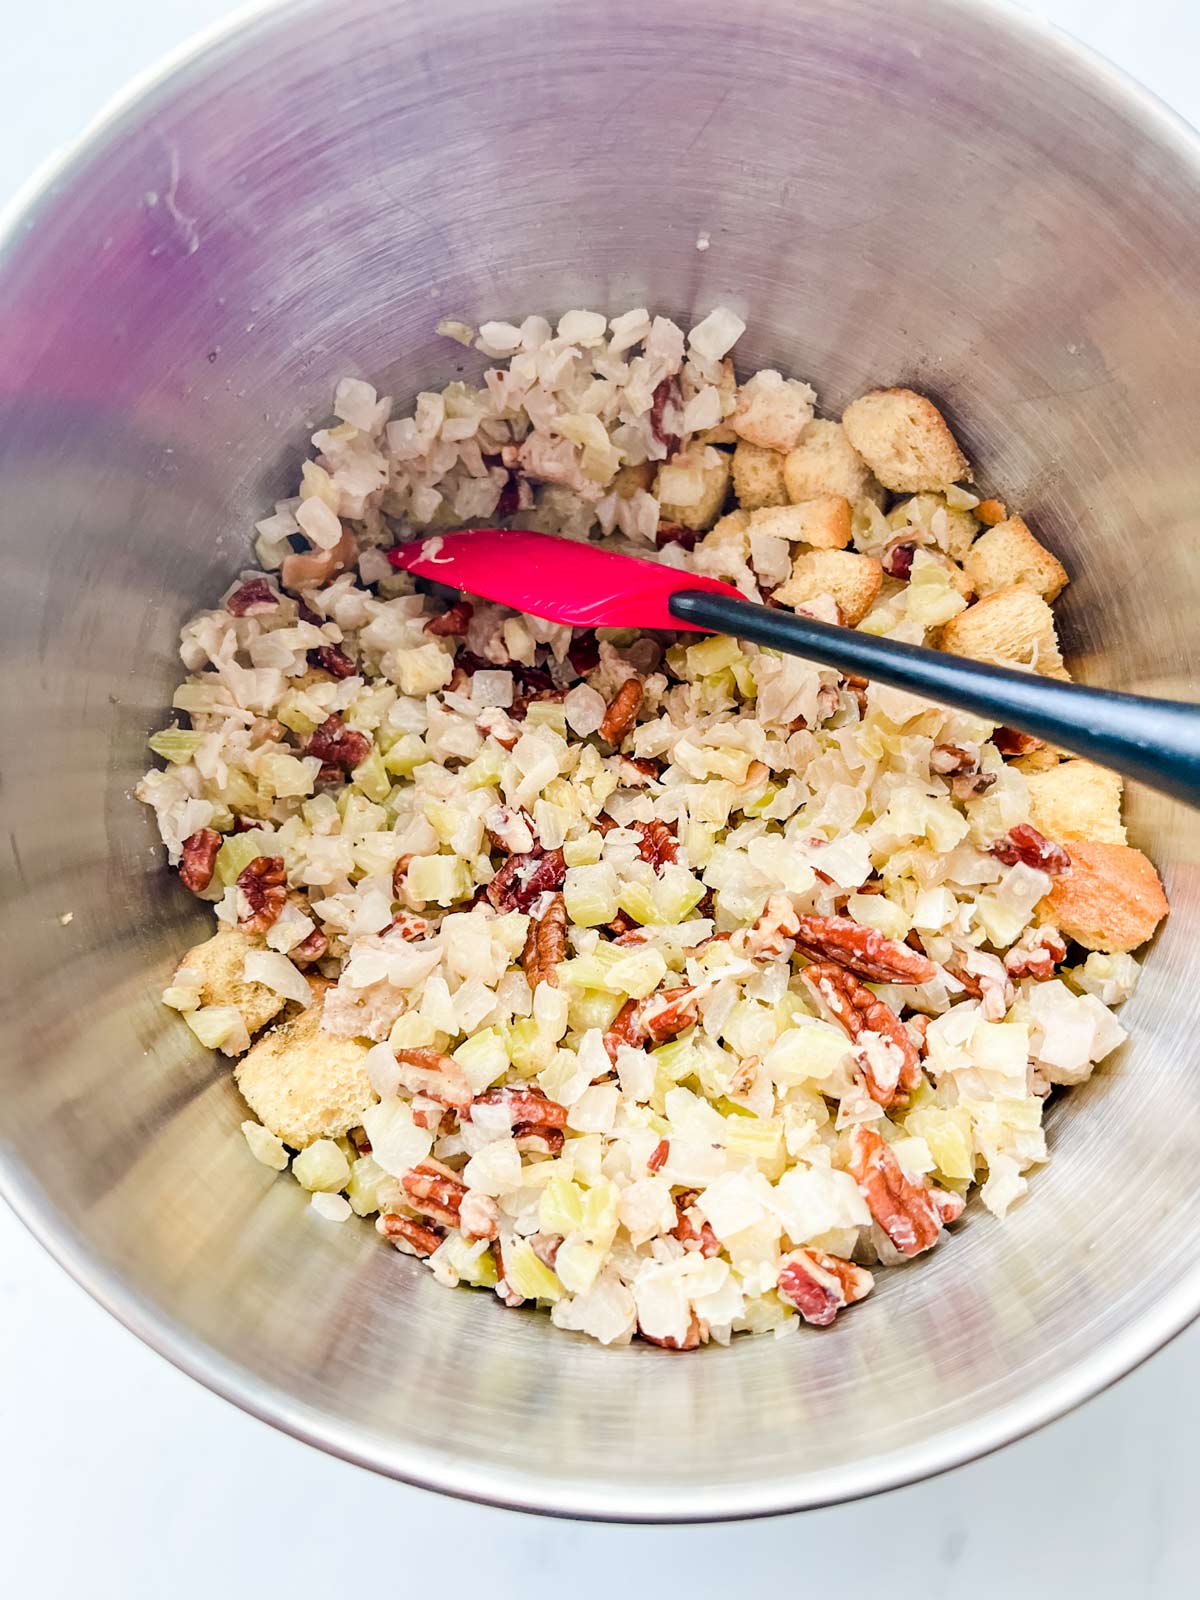 Bread cubes, onion, celery, pecans, and seasonings being tossed in a bowl.